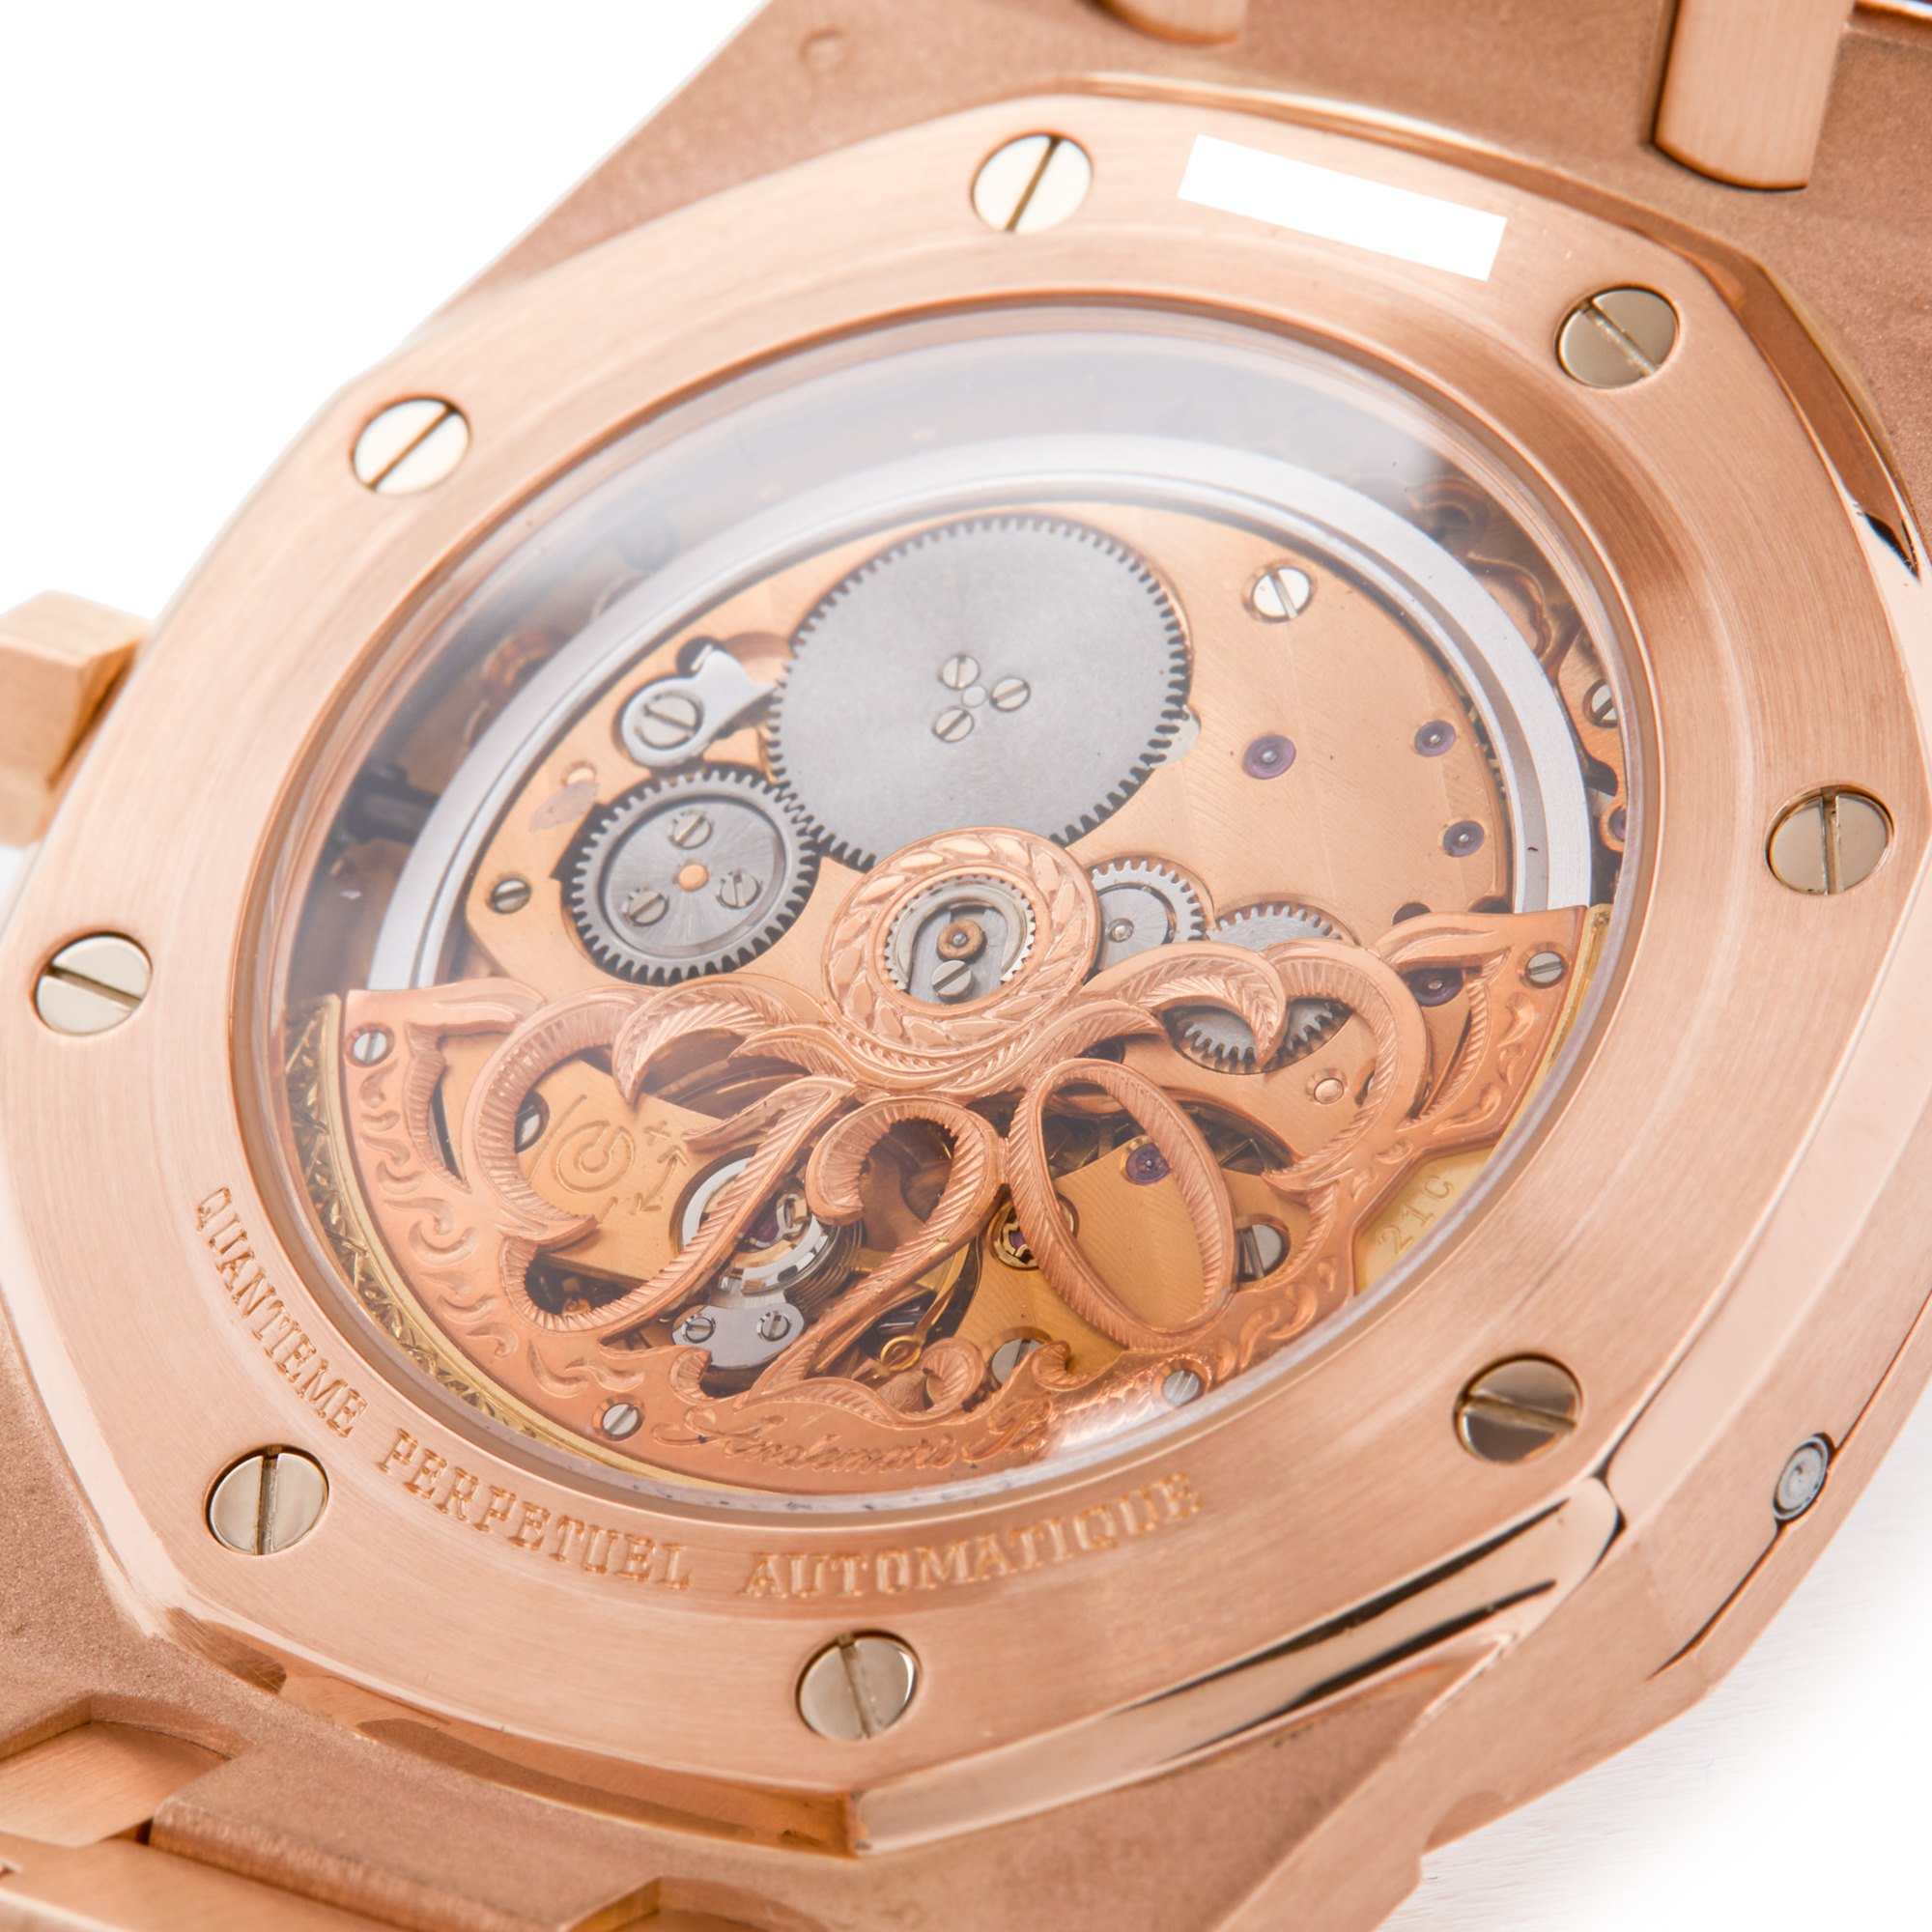 Audemars Piguet Royal Oak Quantieme Perpetual Limited Edition Of 120 Pieces 18K Rose Gold - 25810OR.OO.0944OR.01 Rose Goud 25810OR.OO.0944OR.01